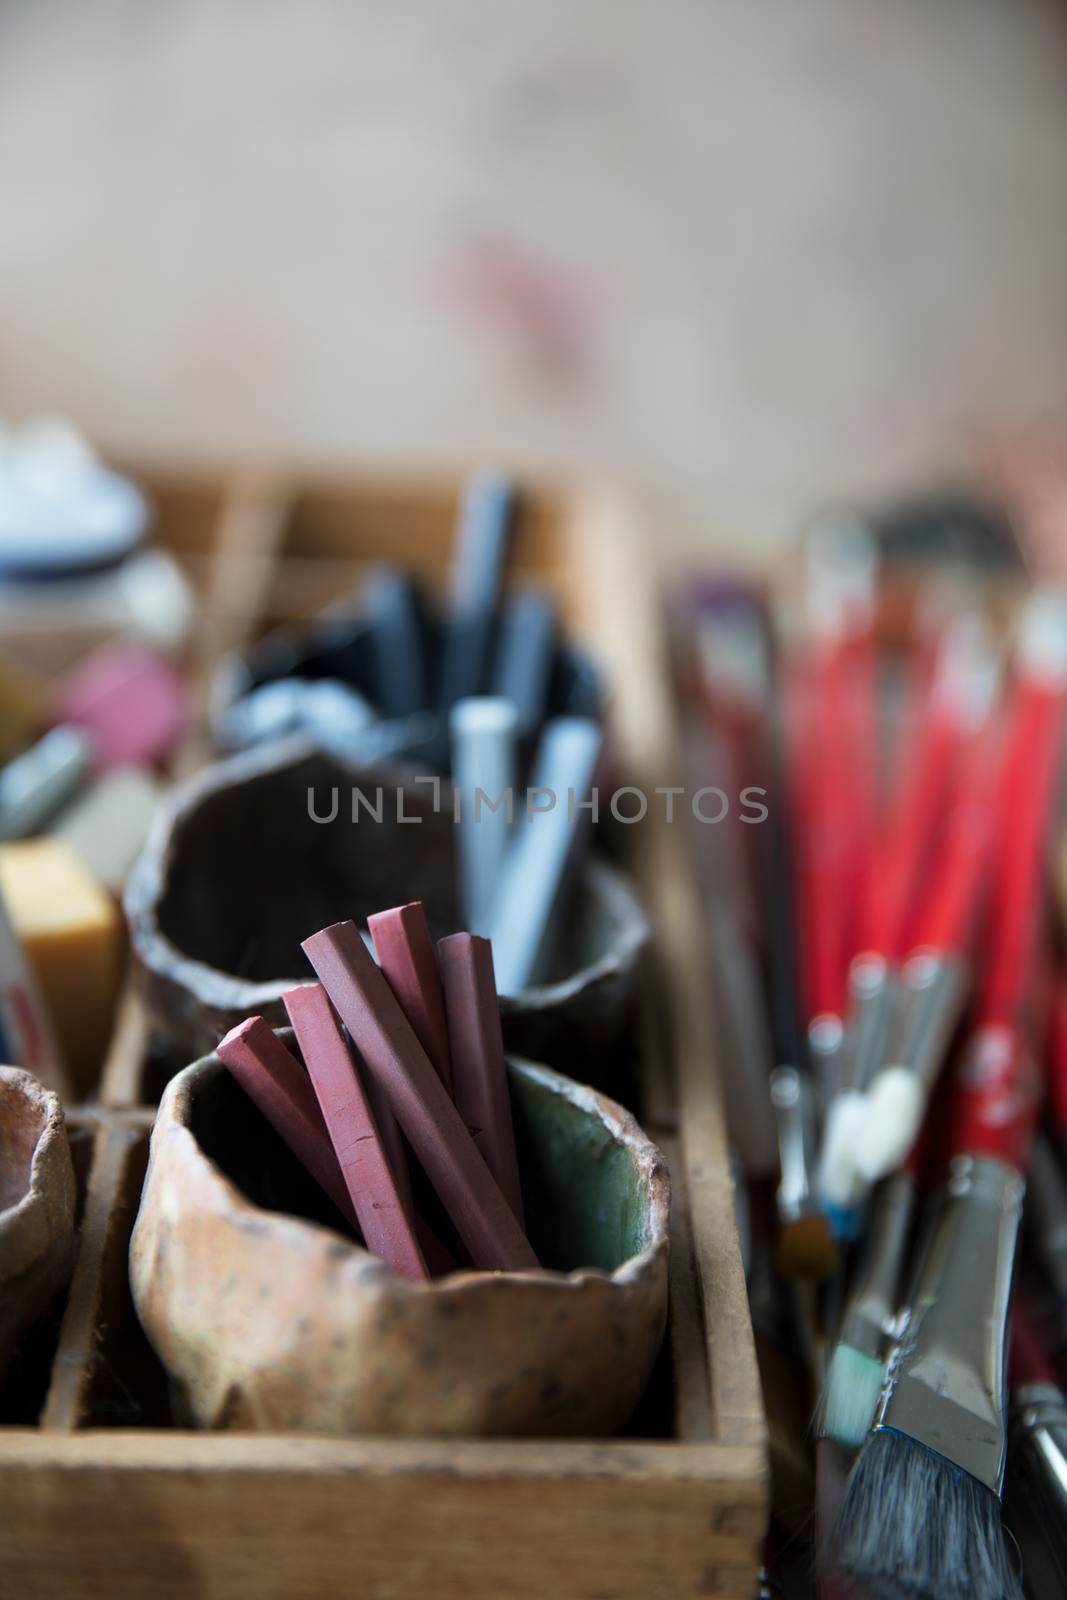 Conte sticks in ceramic pinch pots on artist supply tray with paint brushes